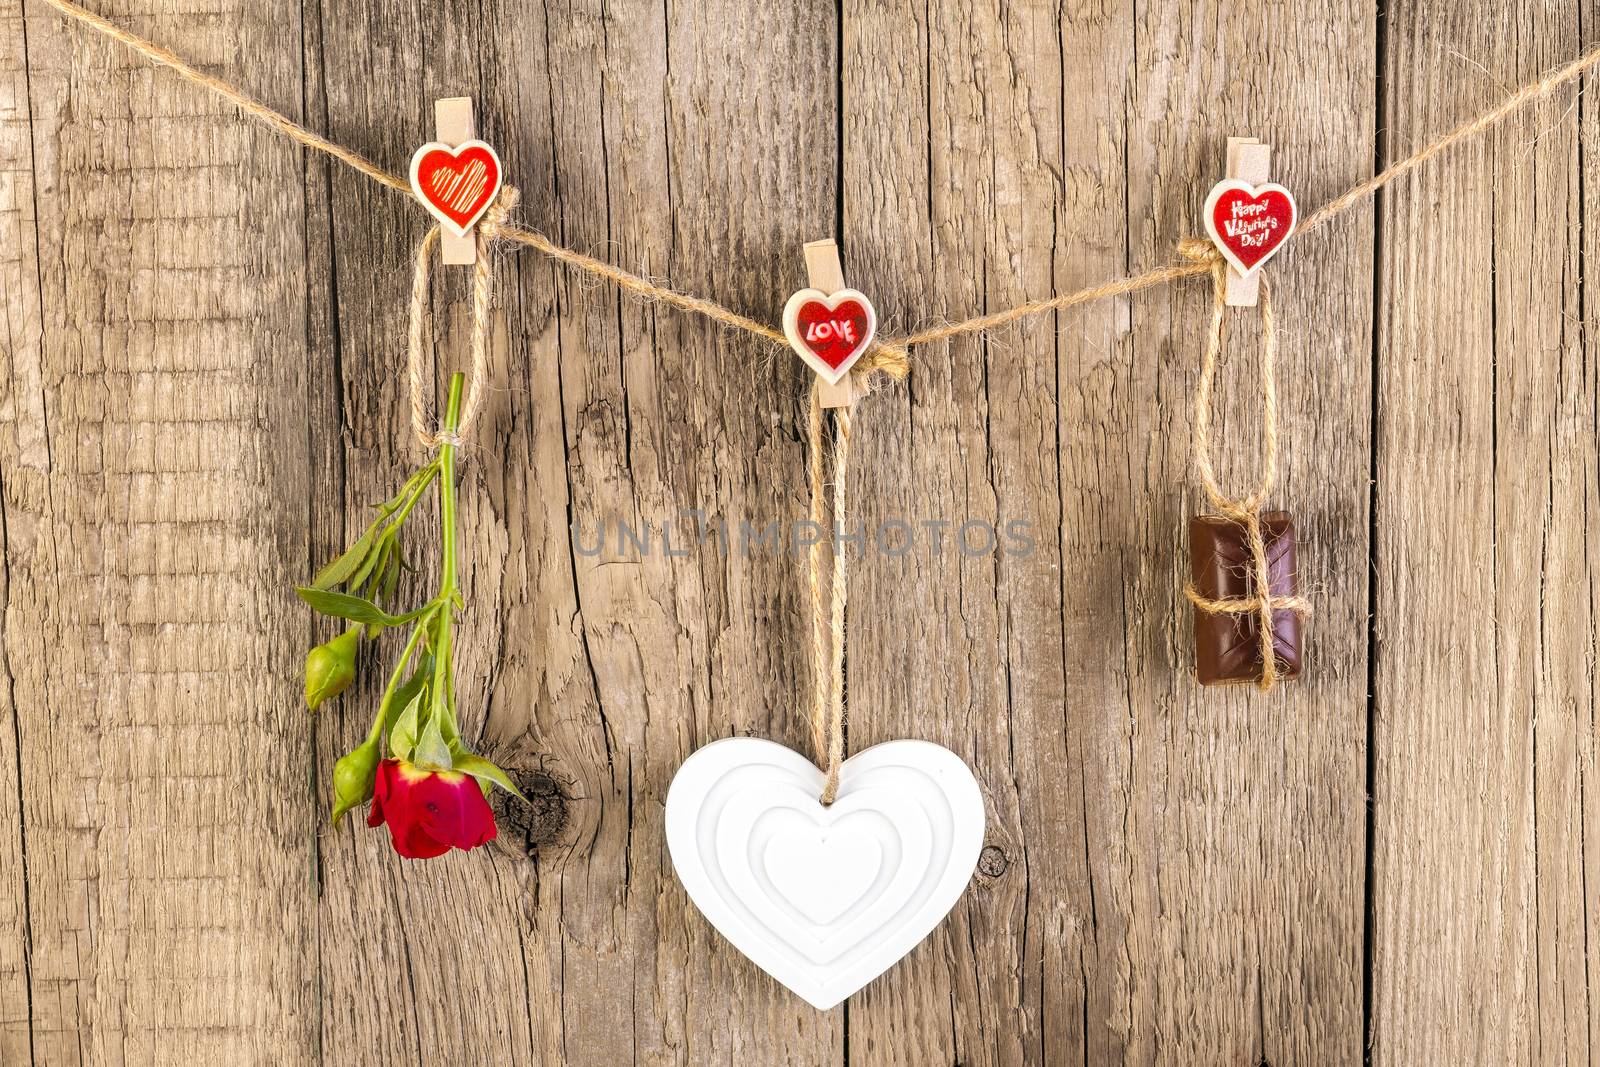 Red rose with white shape heart and chocolate on wooden by manaemedia